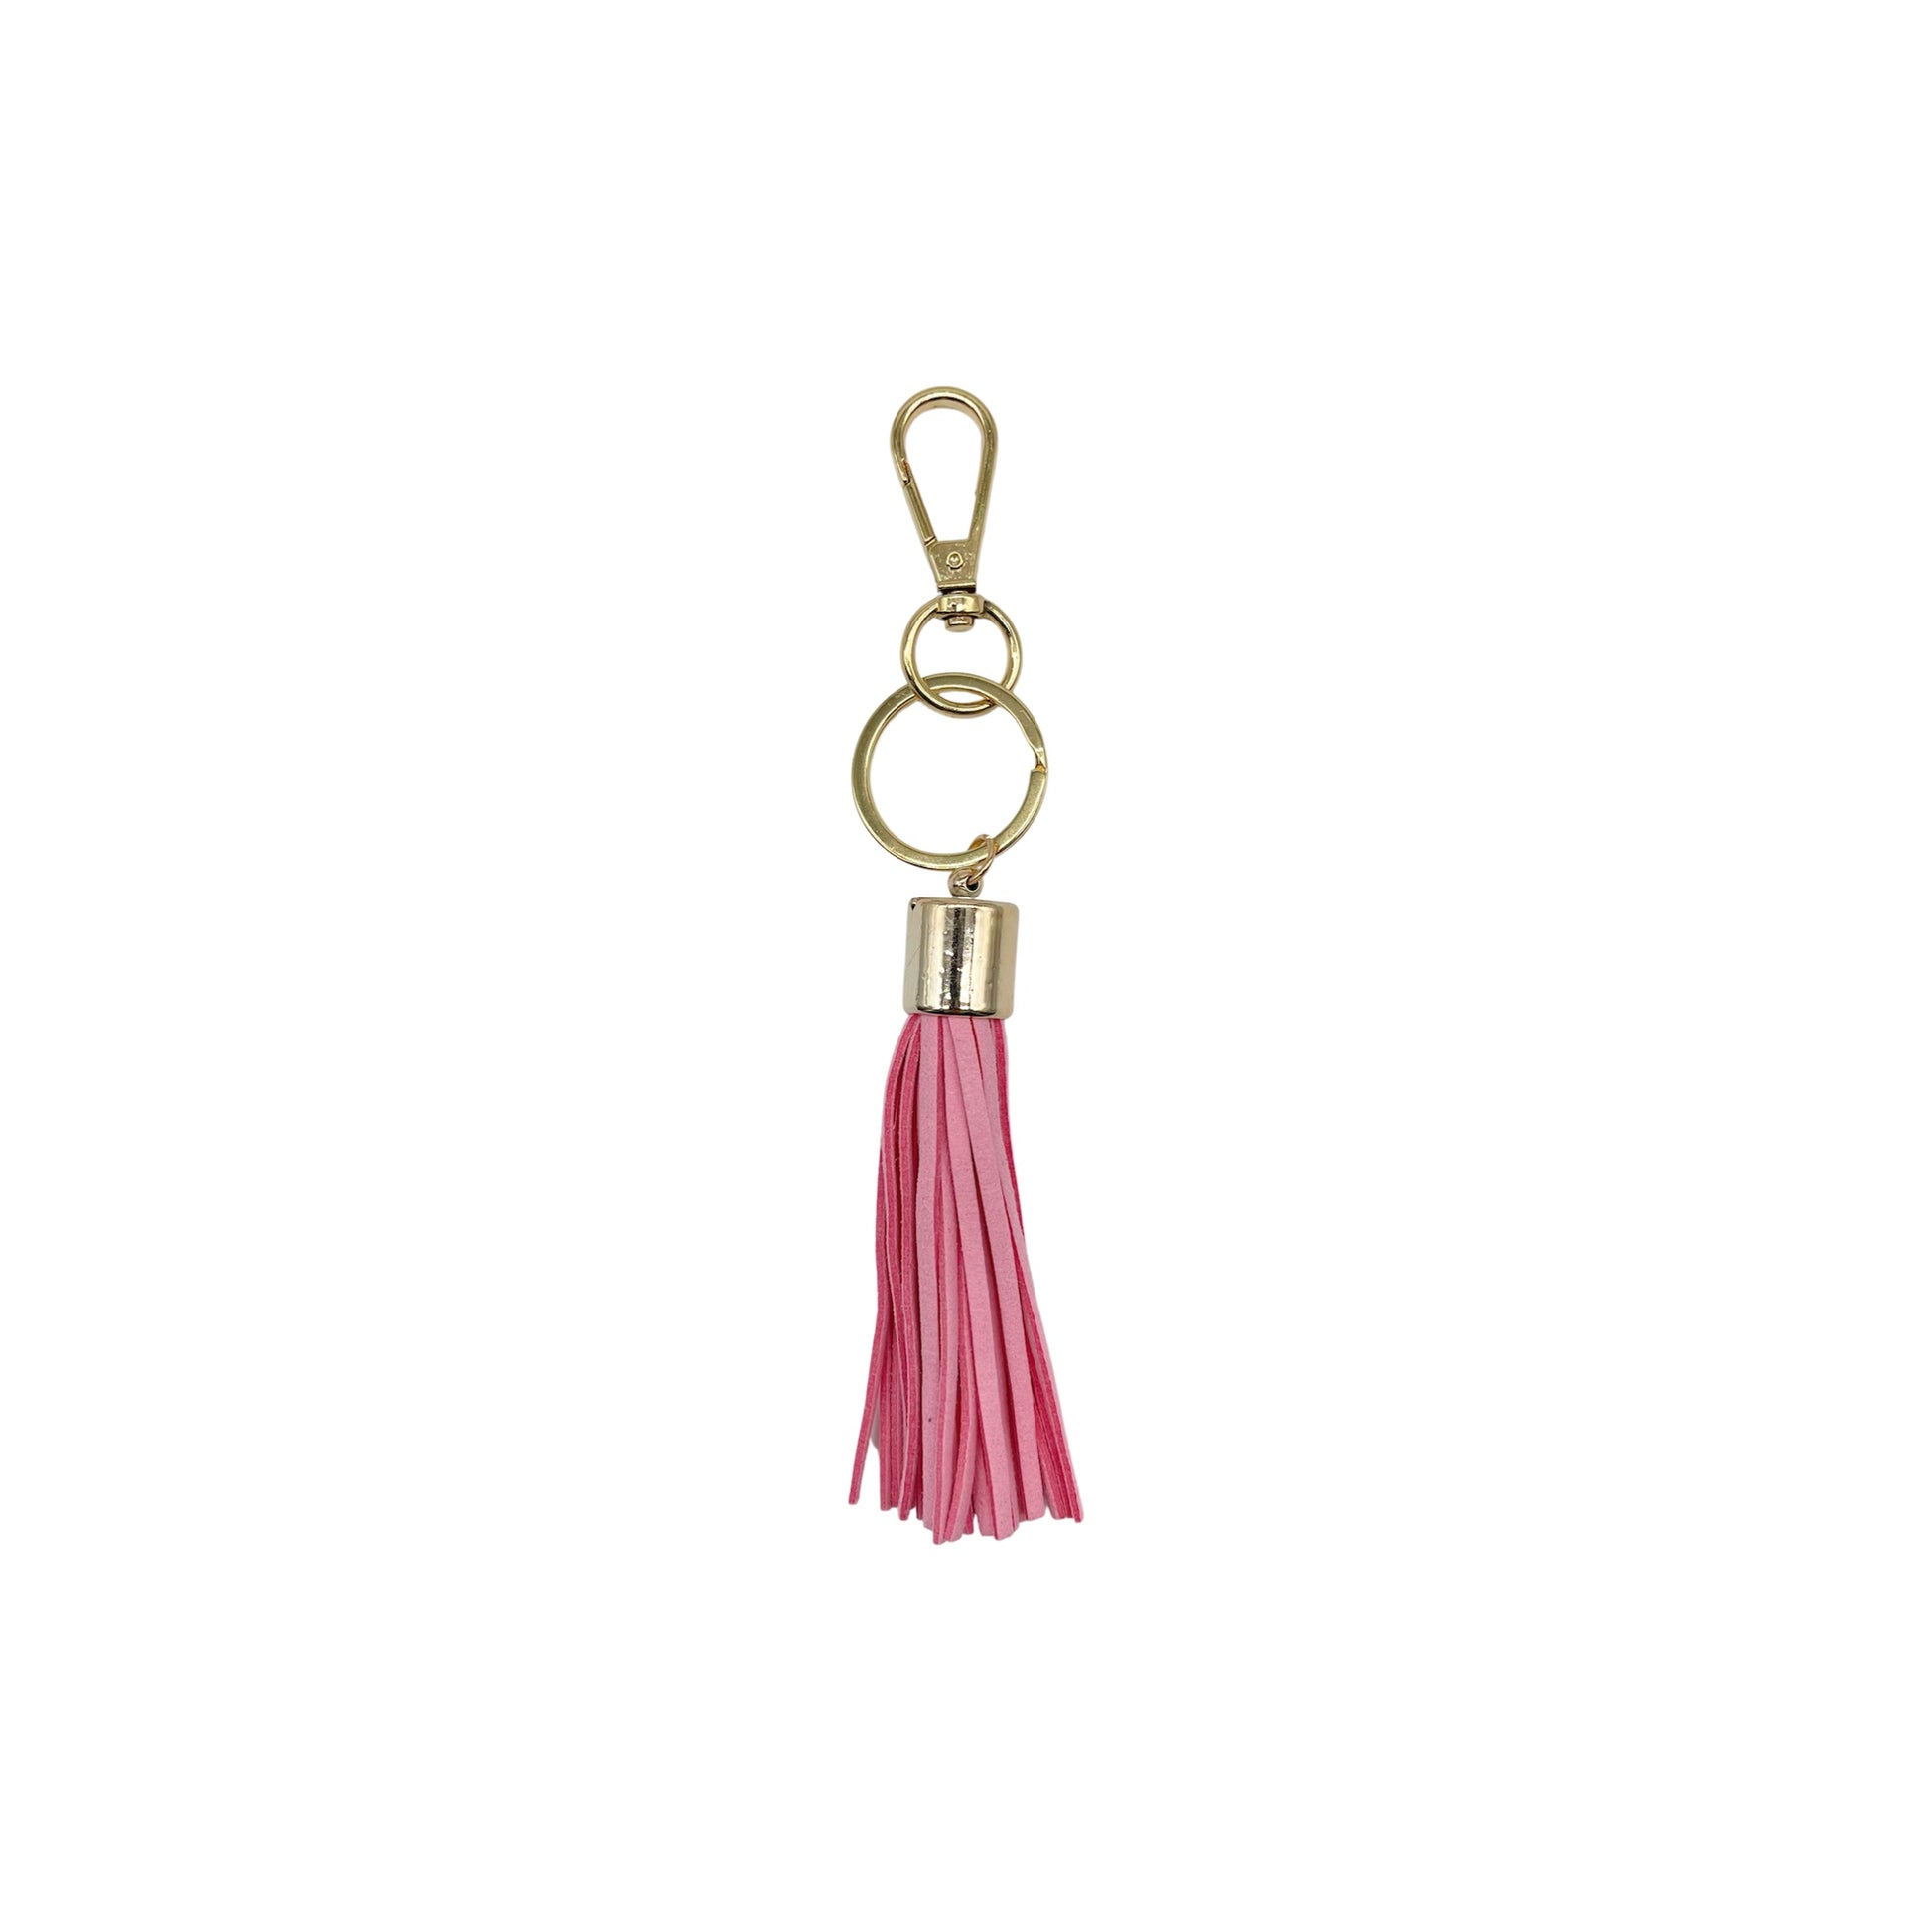 Pink faux Suede Cord tassel keychain assortment.